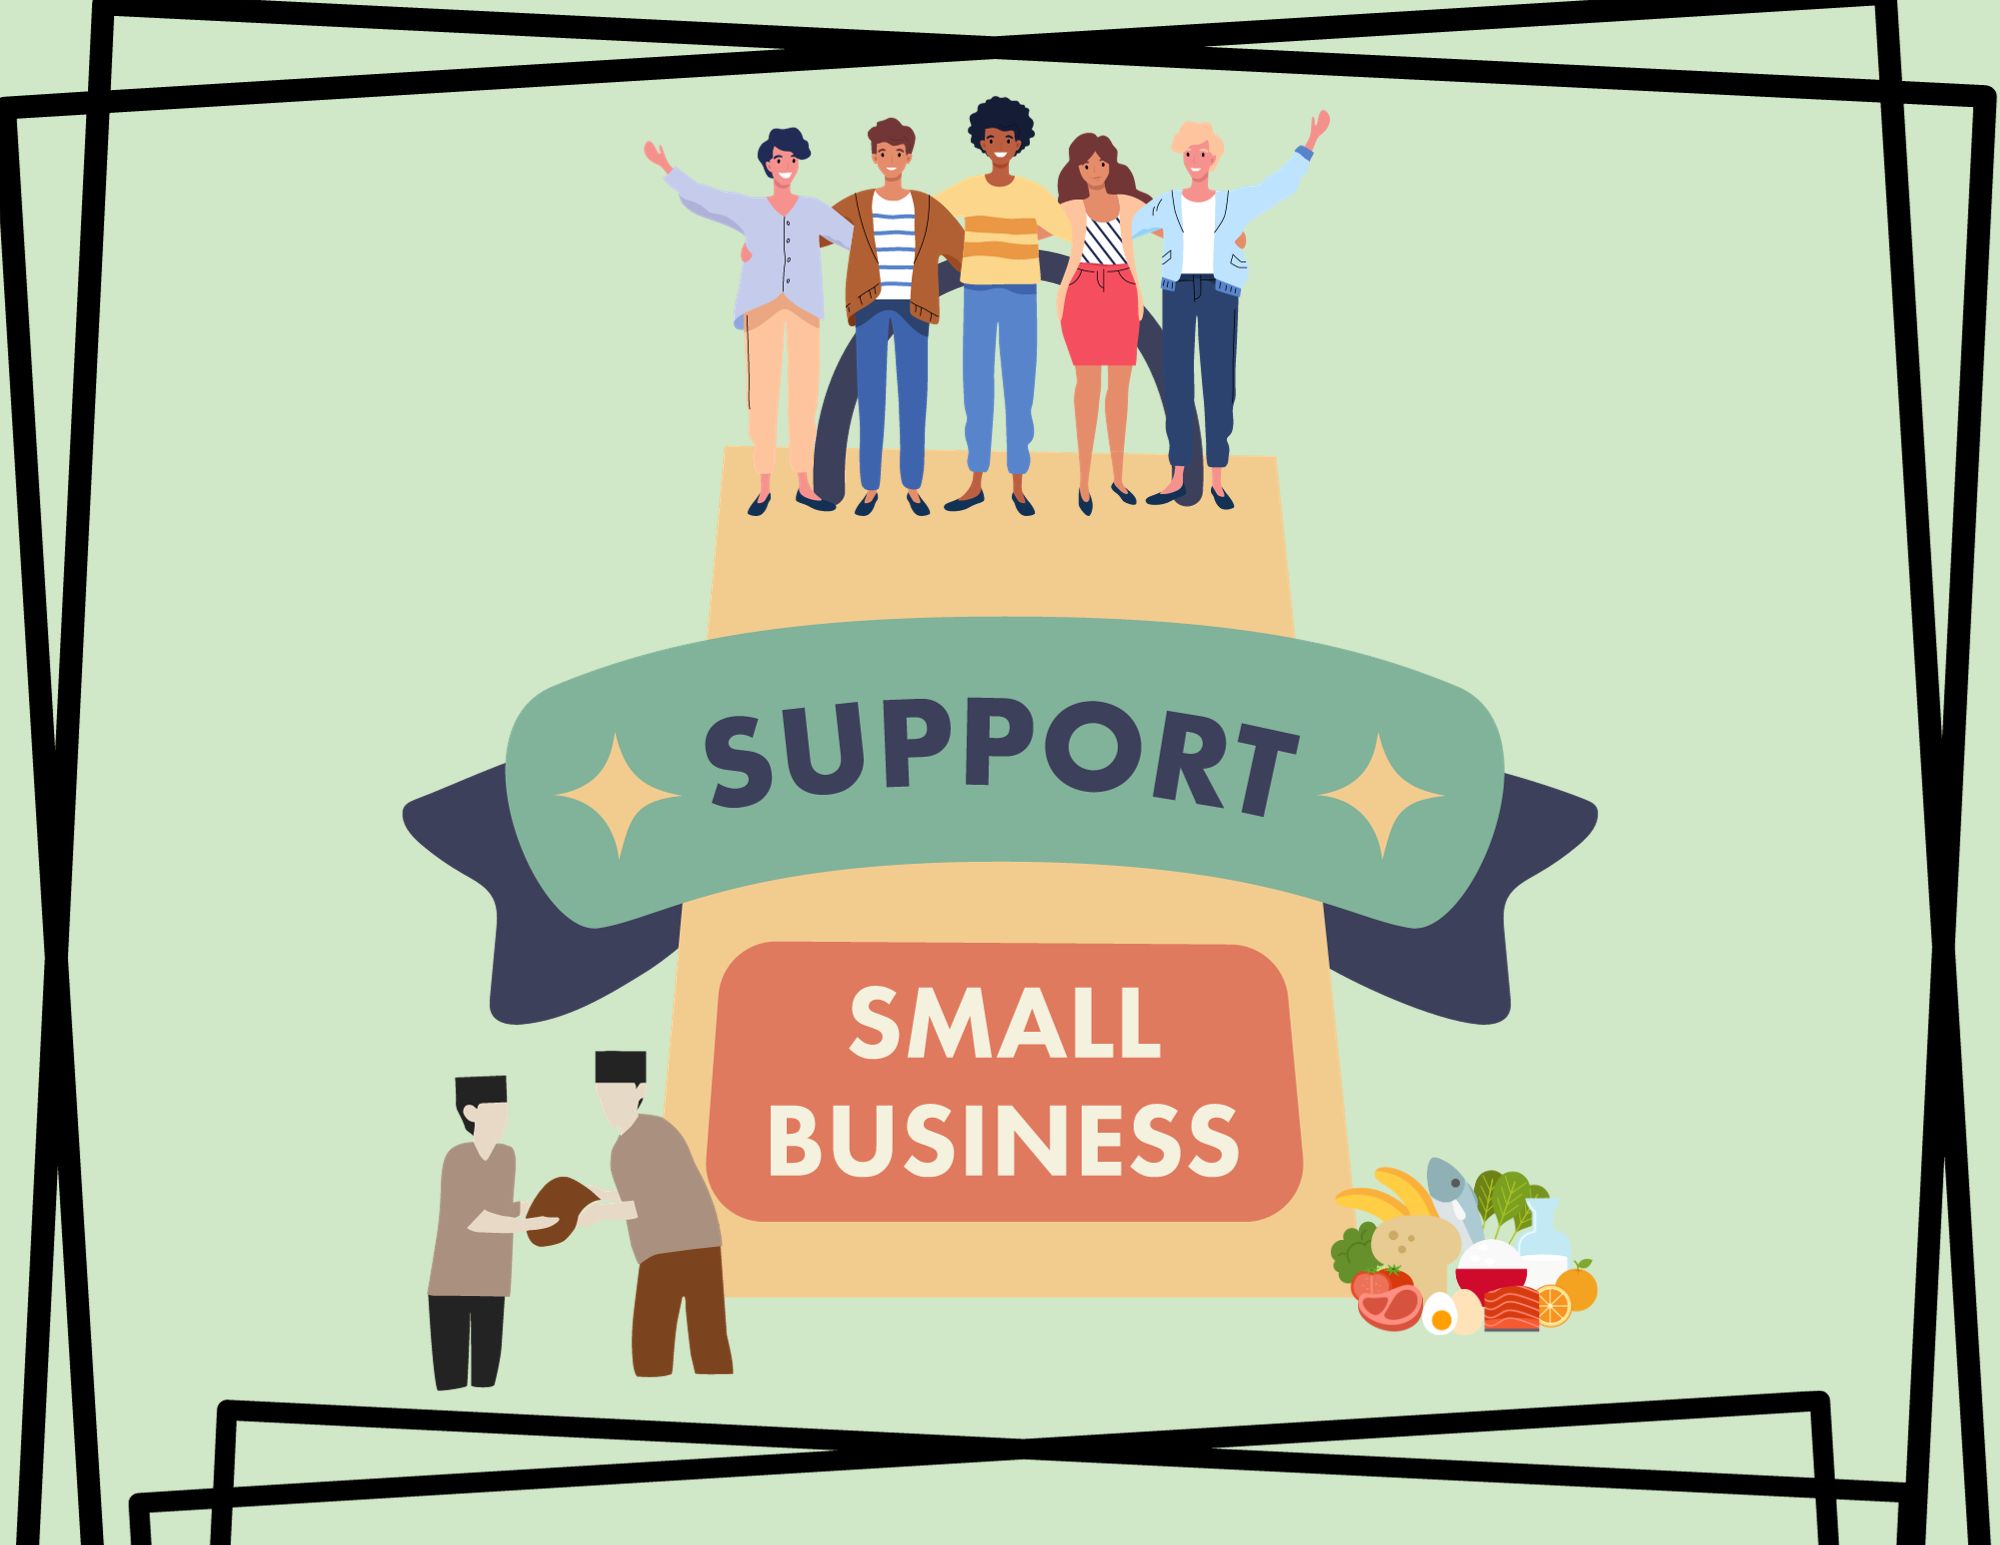 Small businesses surround us everywhere we go, its important to support them to keep our communities lively. These businesses enable people to carry out their creative ideas.